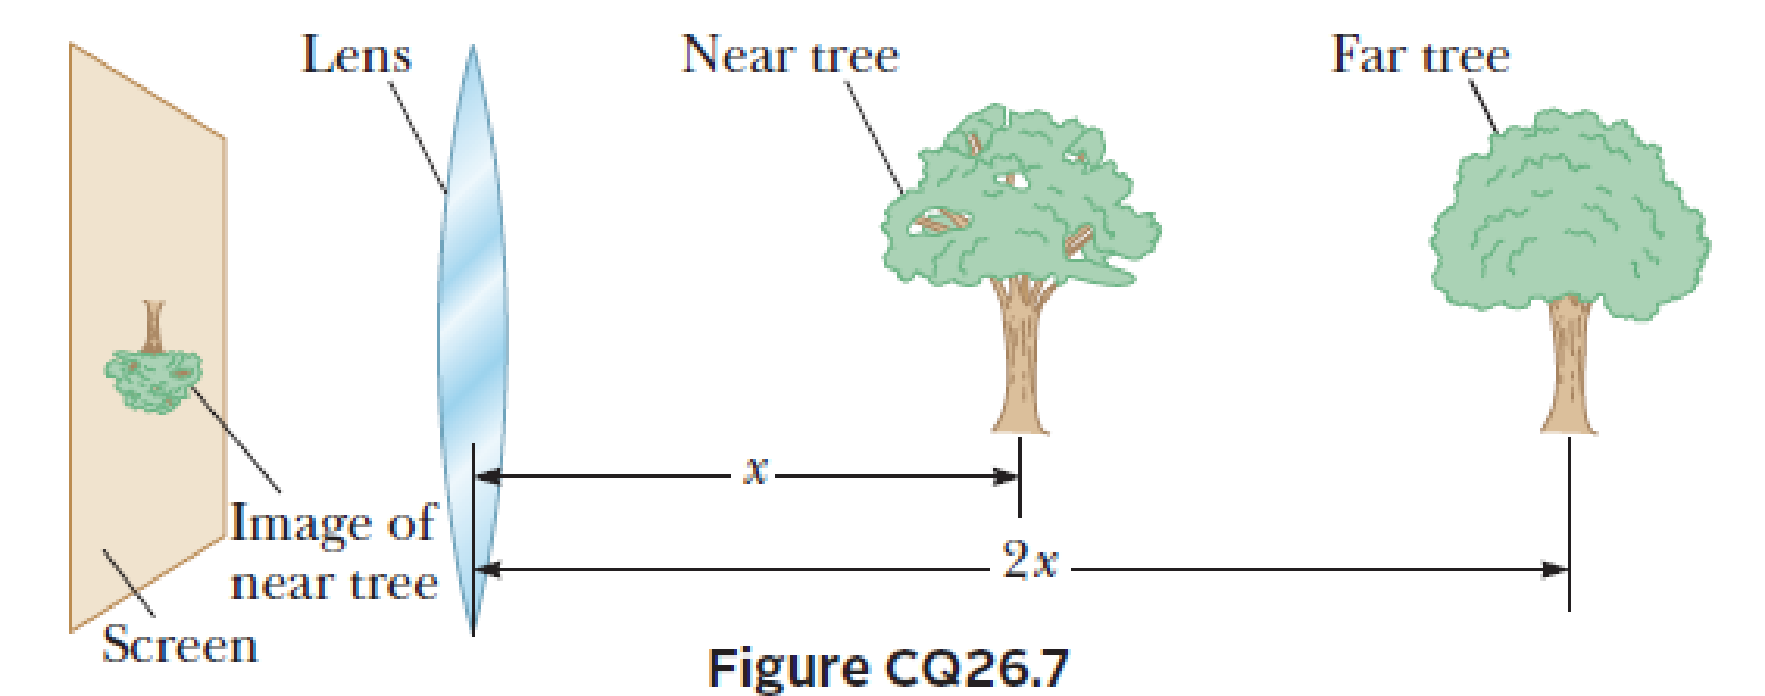 Chapter 26, Problem 7CQ, Suppose you want to use a converging lens to project the image of two trees onto a screen. As shown 